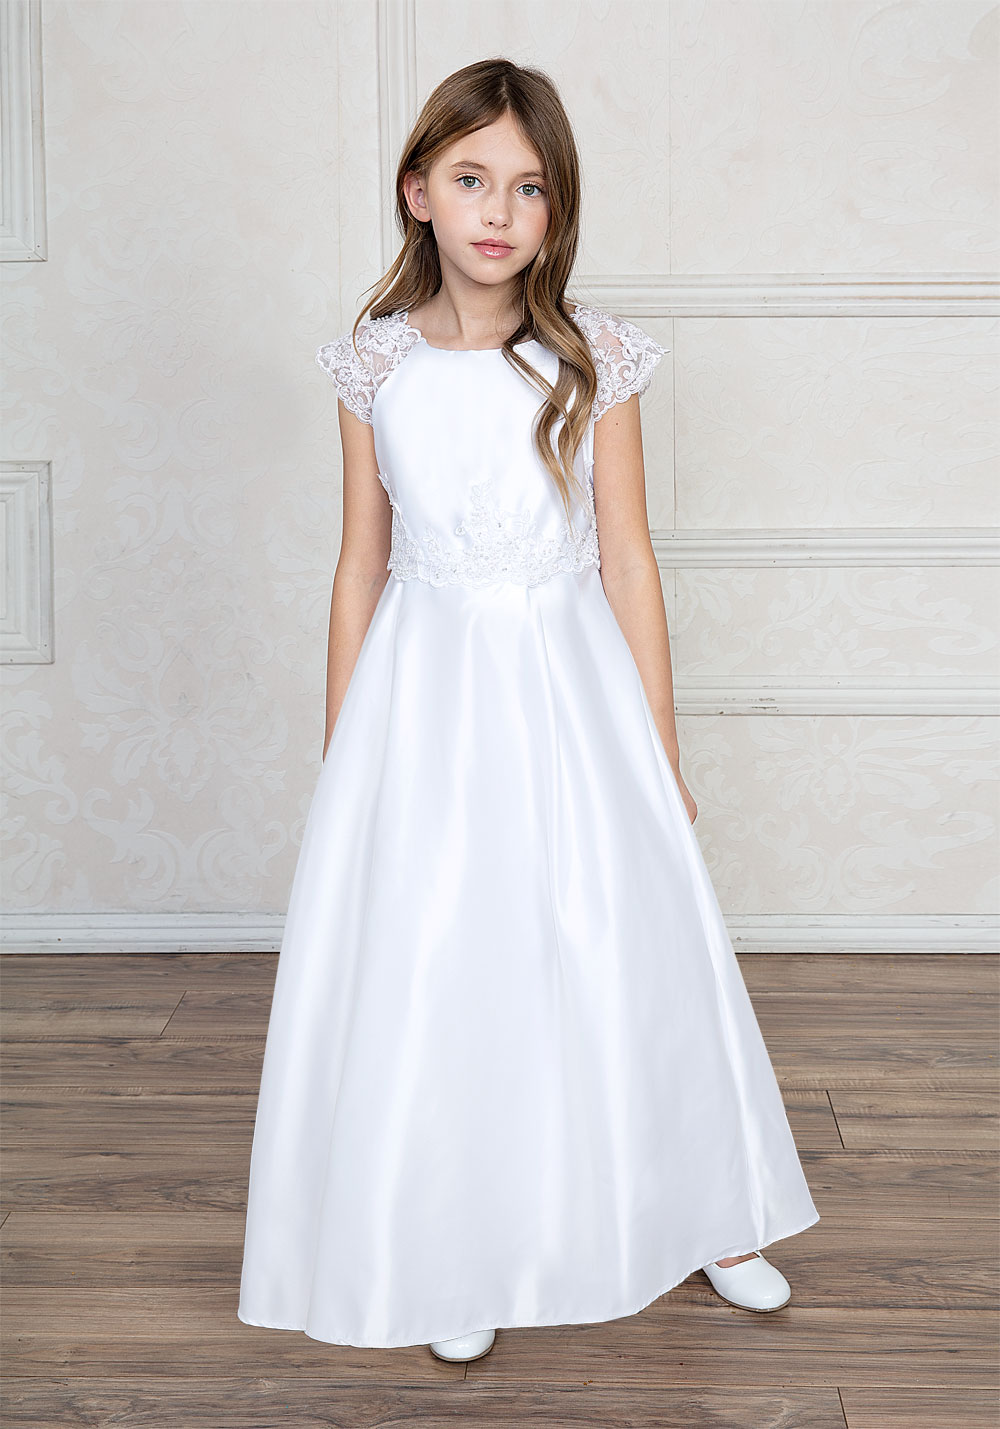 Satin A Line First Communion Dress With Lace Cap Sleeves 